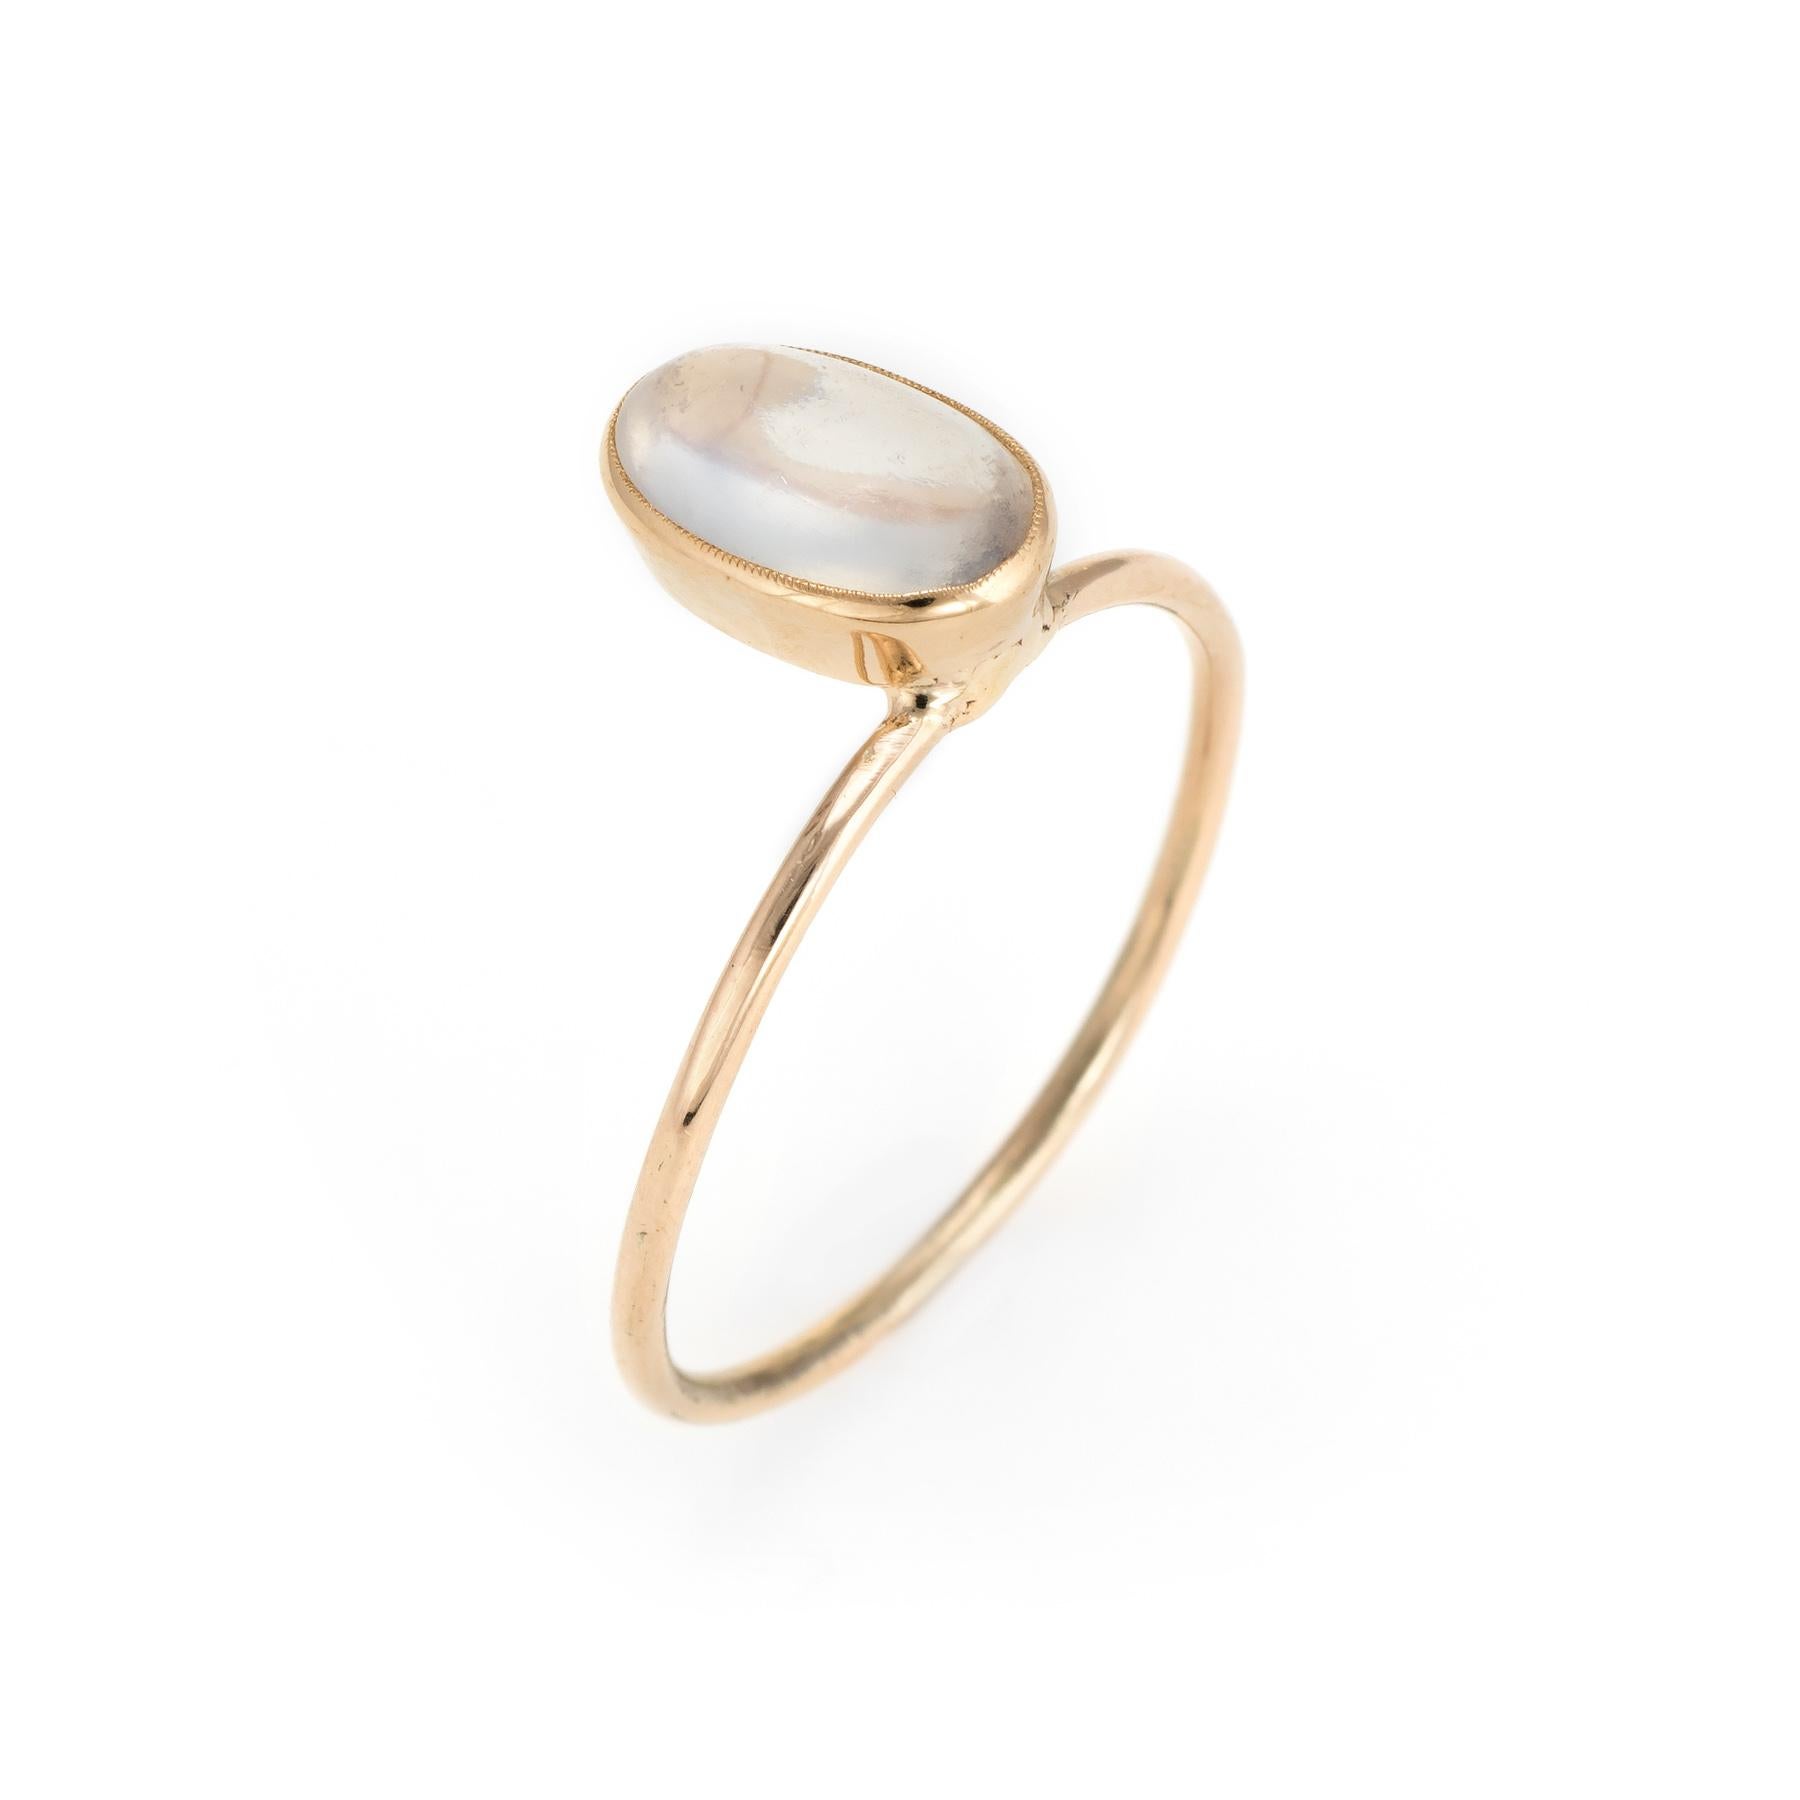 Originally an antique Art Nouveau era stick pin (circa 1900s), the moonstone ring is crafted in 14 karat yellow gold. 

The ring is mounted with the original stick pin. Our jeweler rounded the stick pin into a slim band for the finger. The moonstone